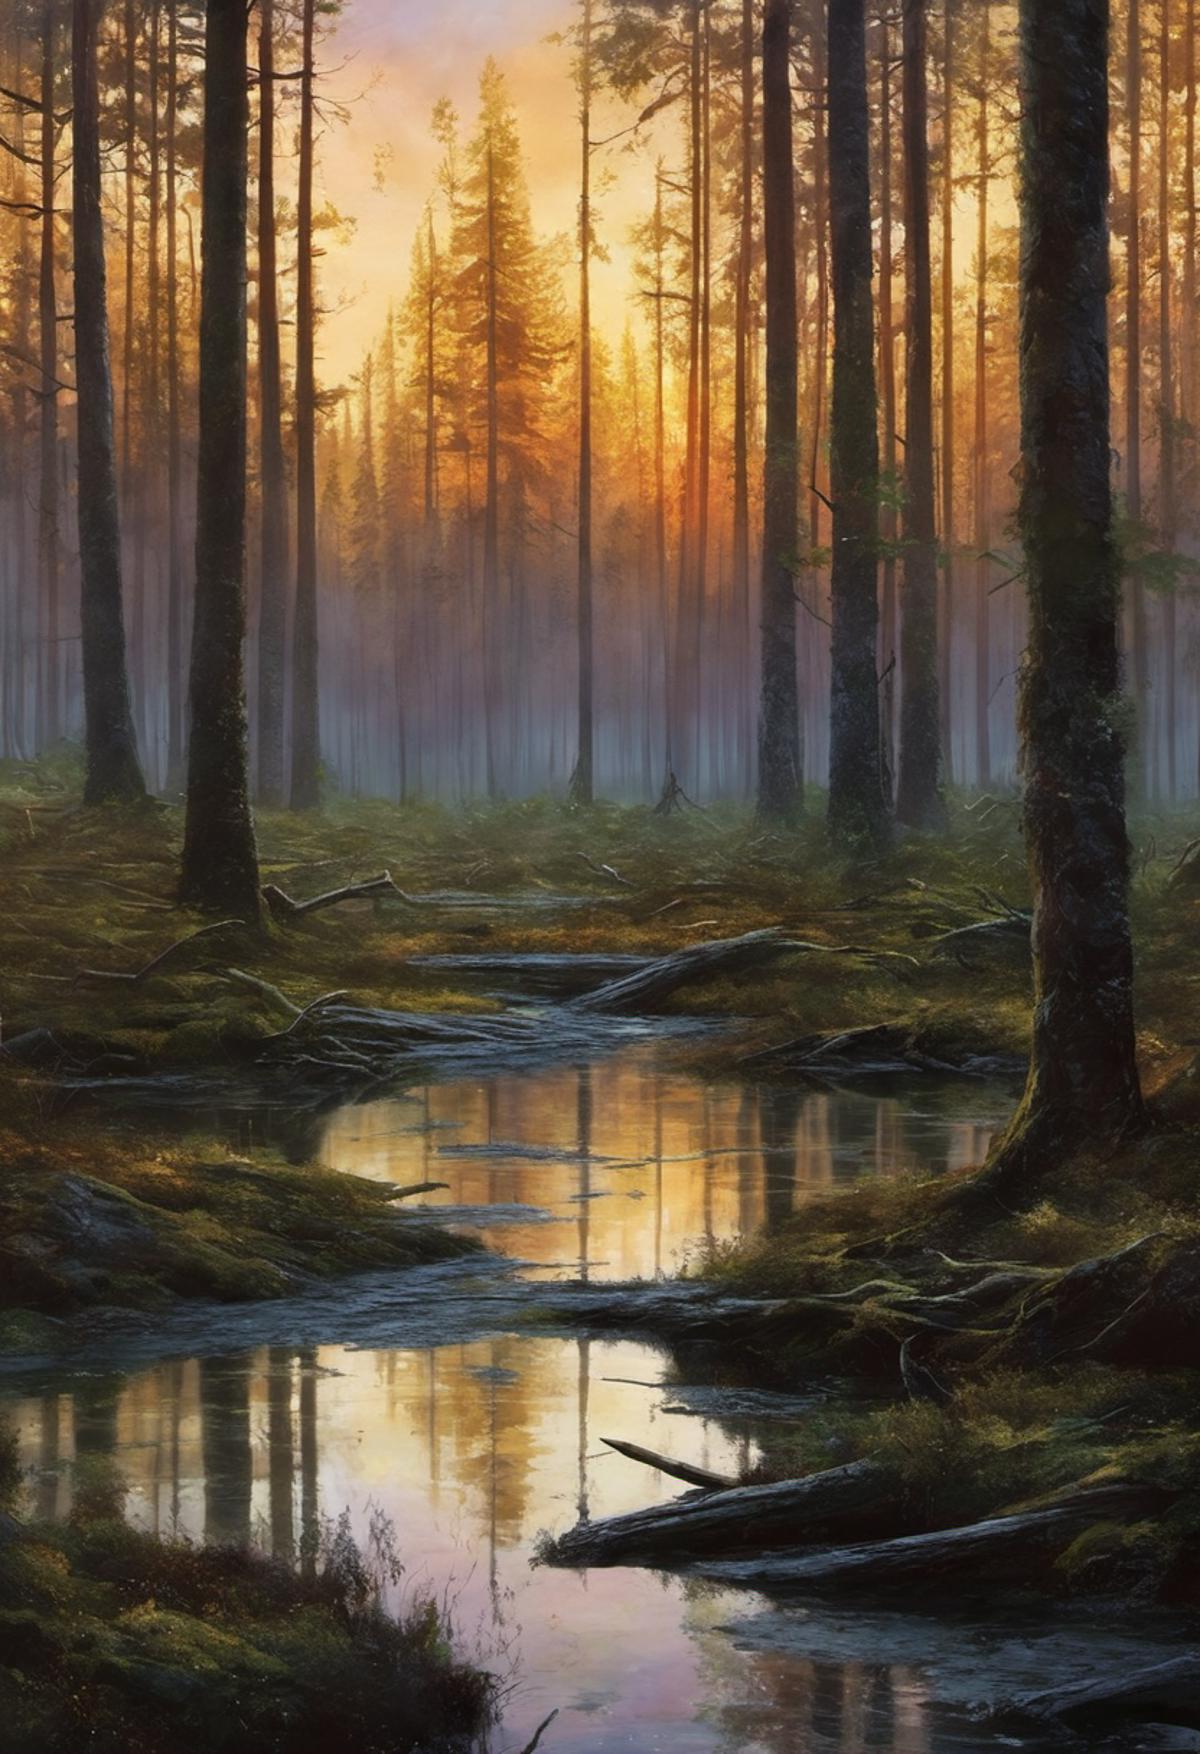 A painting of a forest with a small stream and sunlight.